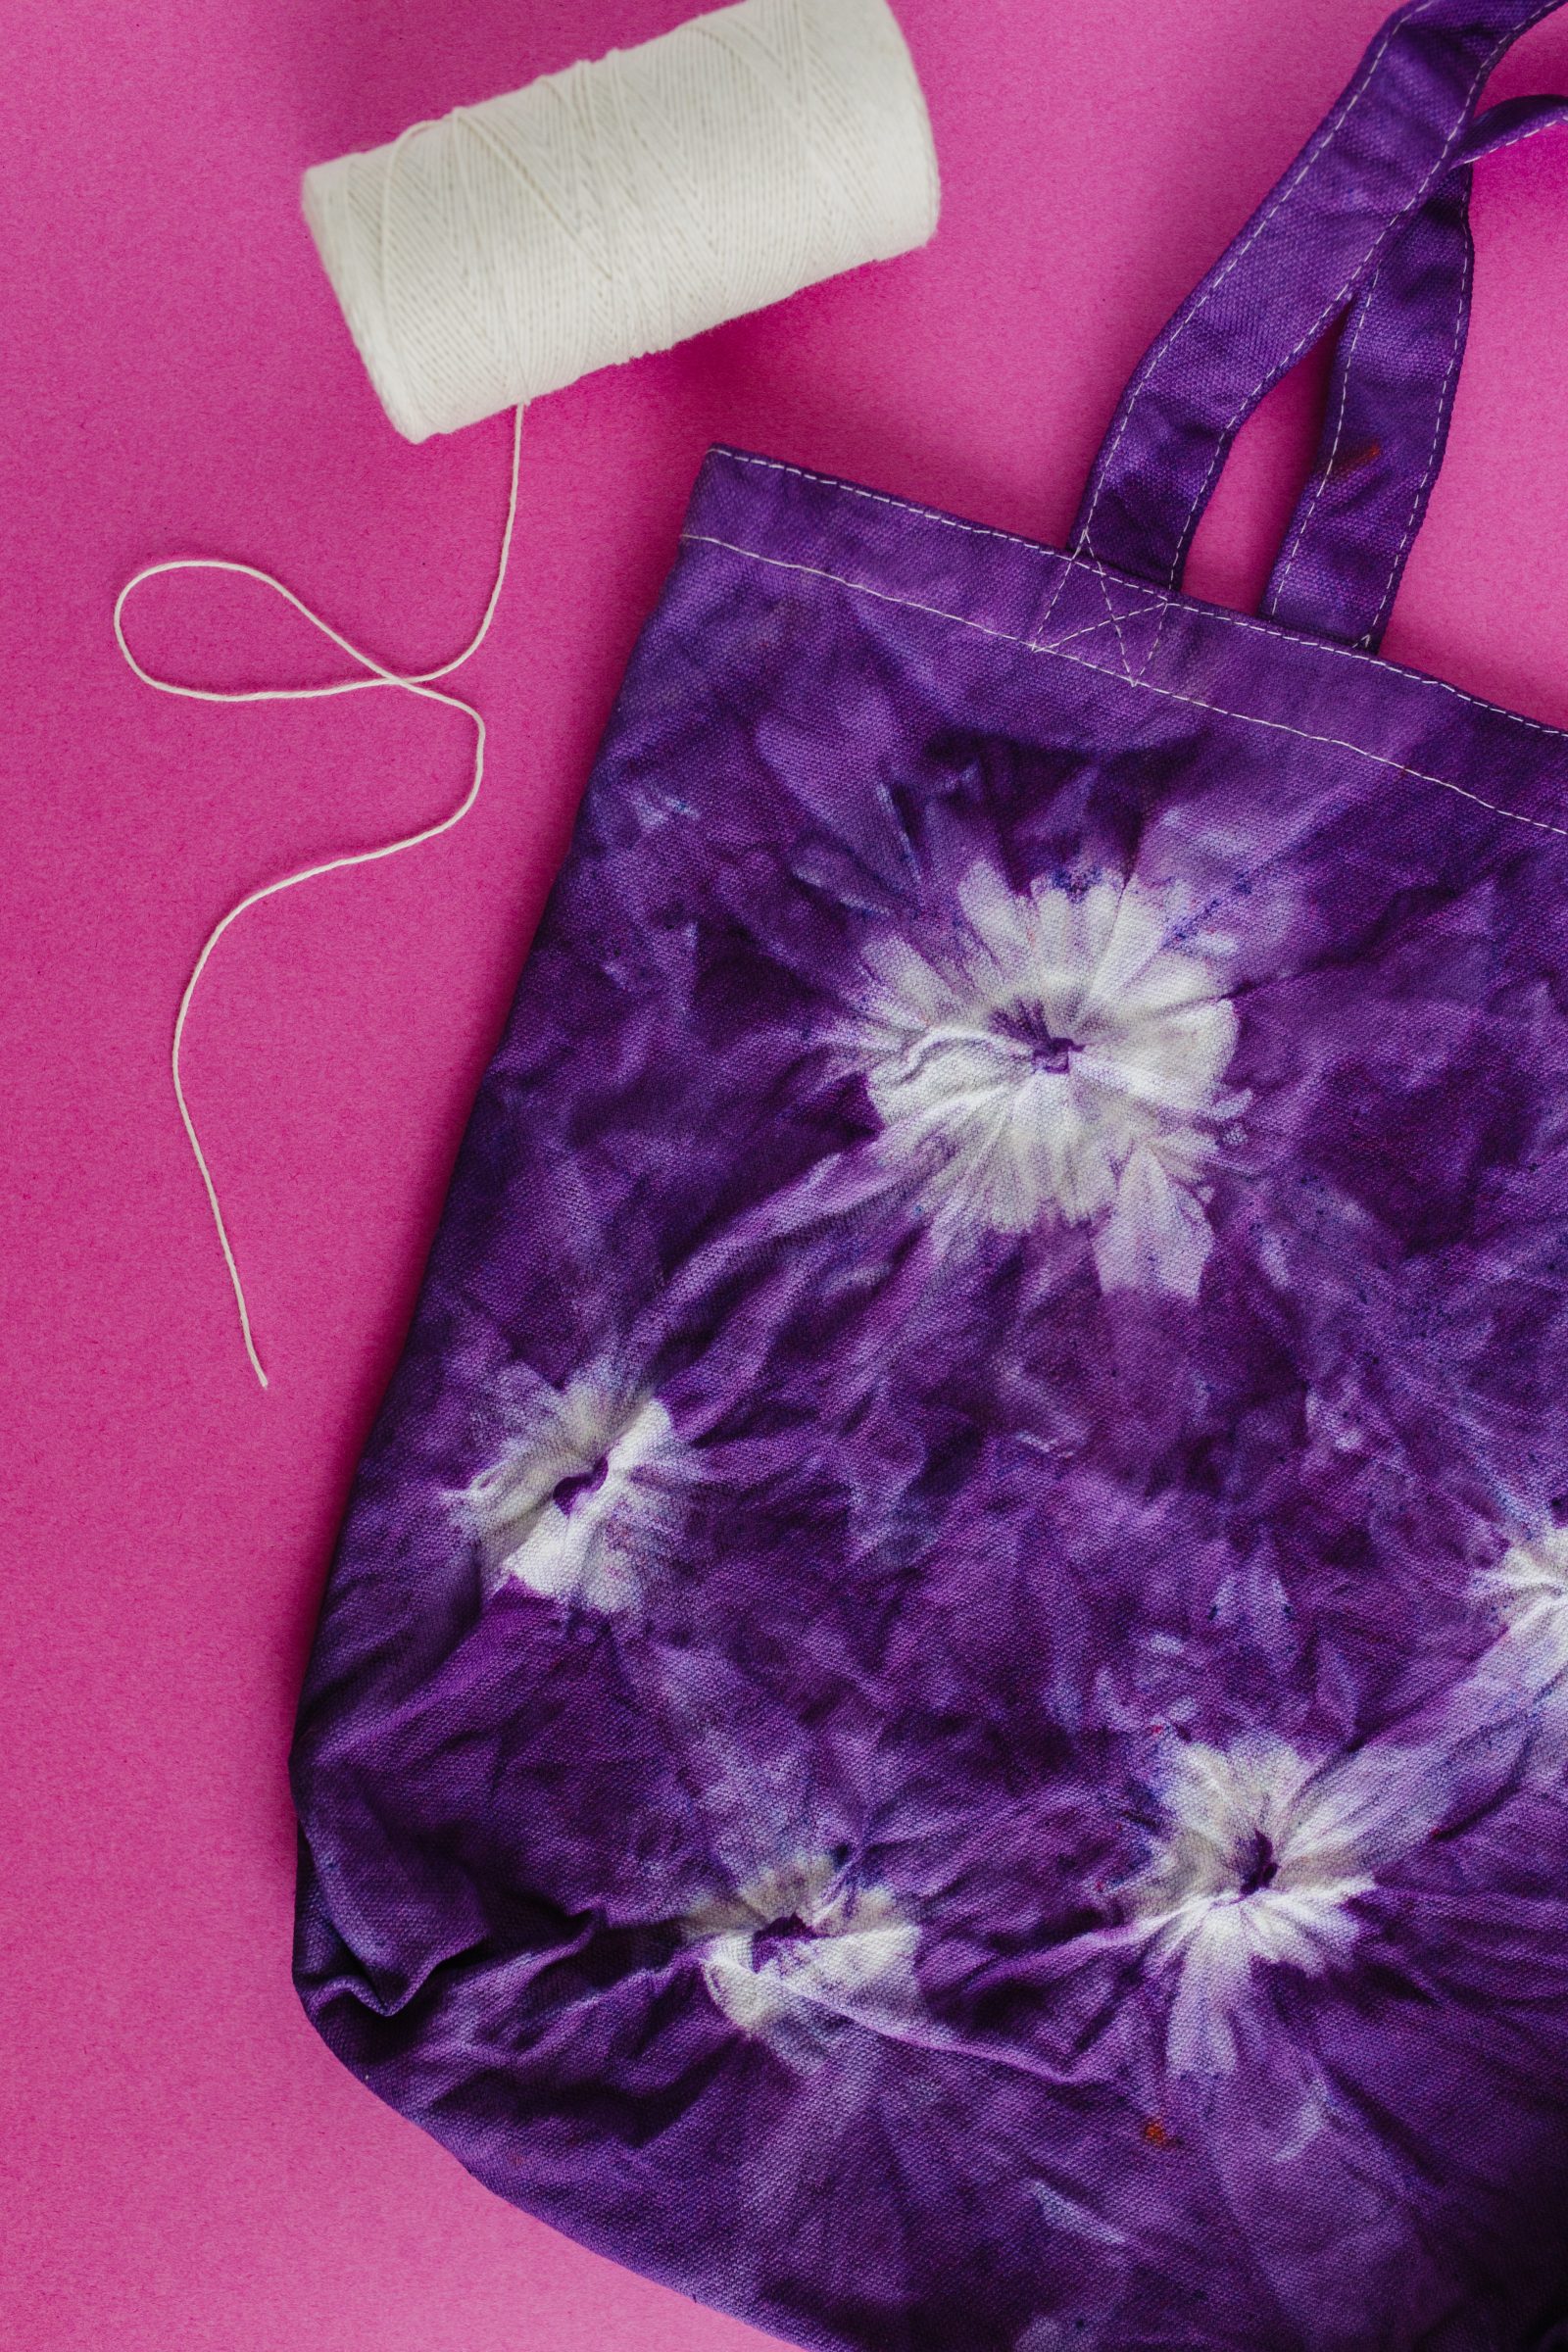 DIY Sunburst Tie Dye Tote Bags + a tutorial featured by Top US Craft Blog + The Pretty Life Girls